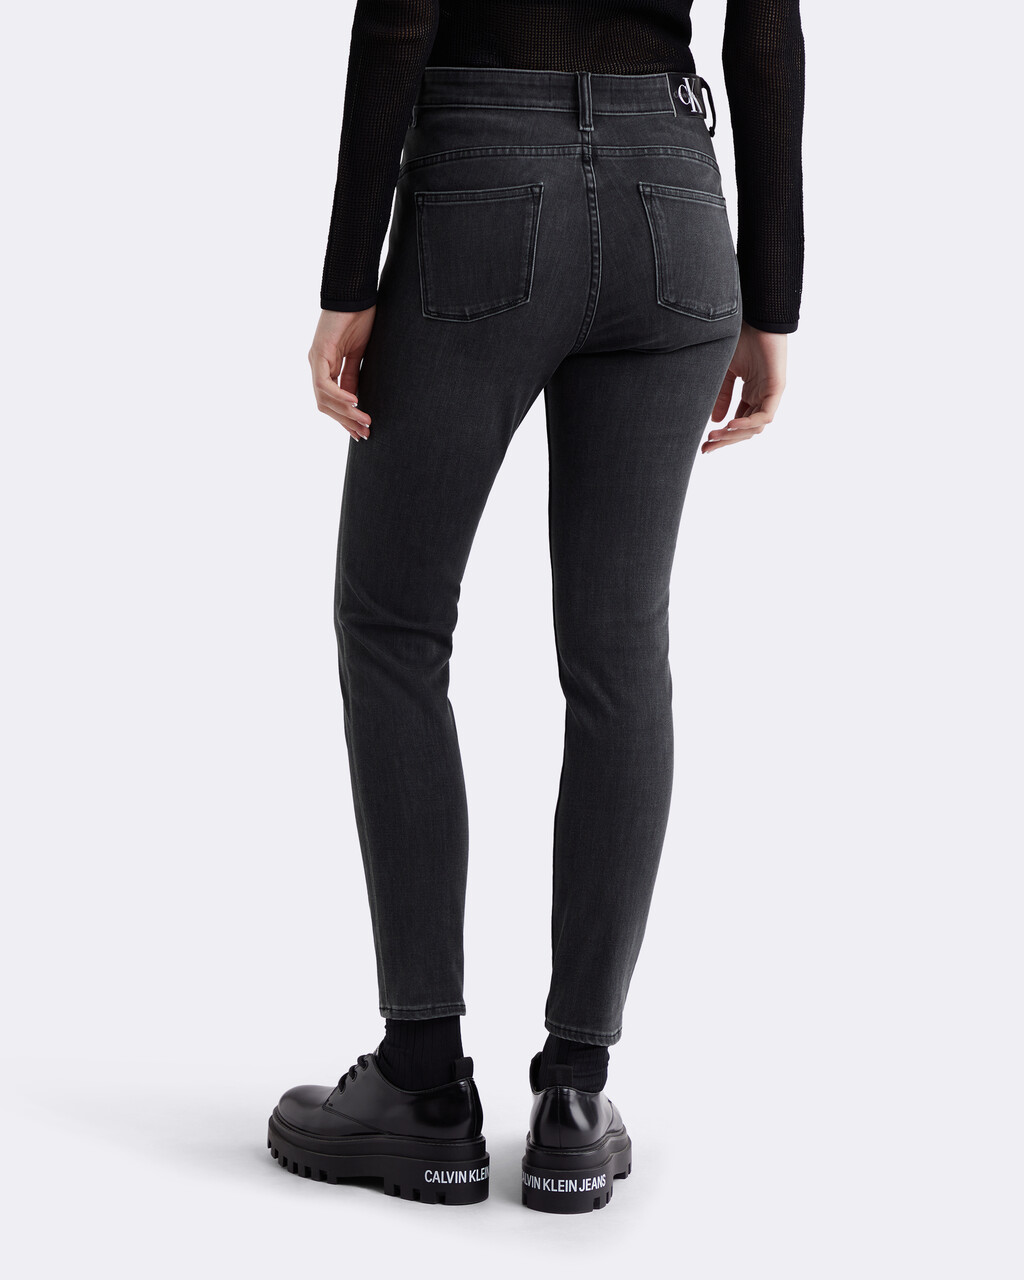 37.5 Bi-Stretch High Rise Body Skinny Ankle Jeans, 049A WASHED BLK, hi-res